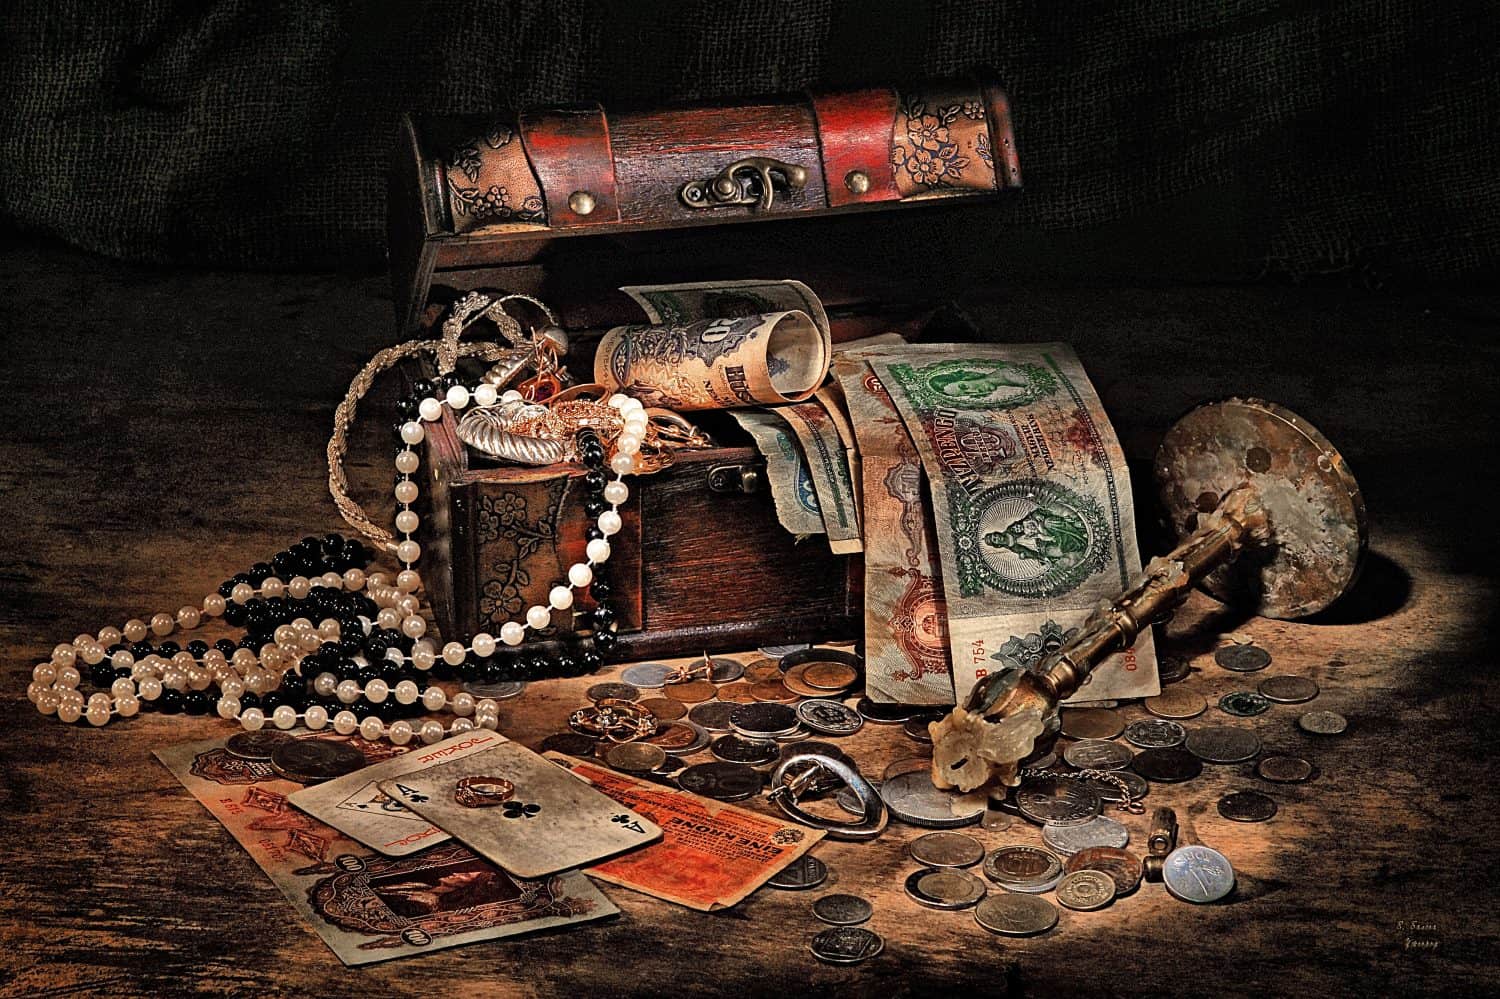 Still life with treasures, cards, candlestick on a dark background